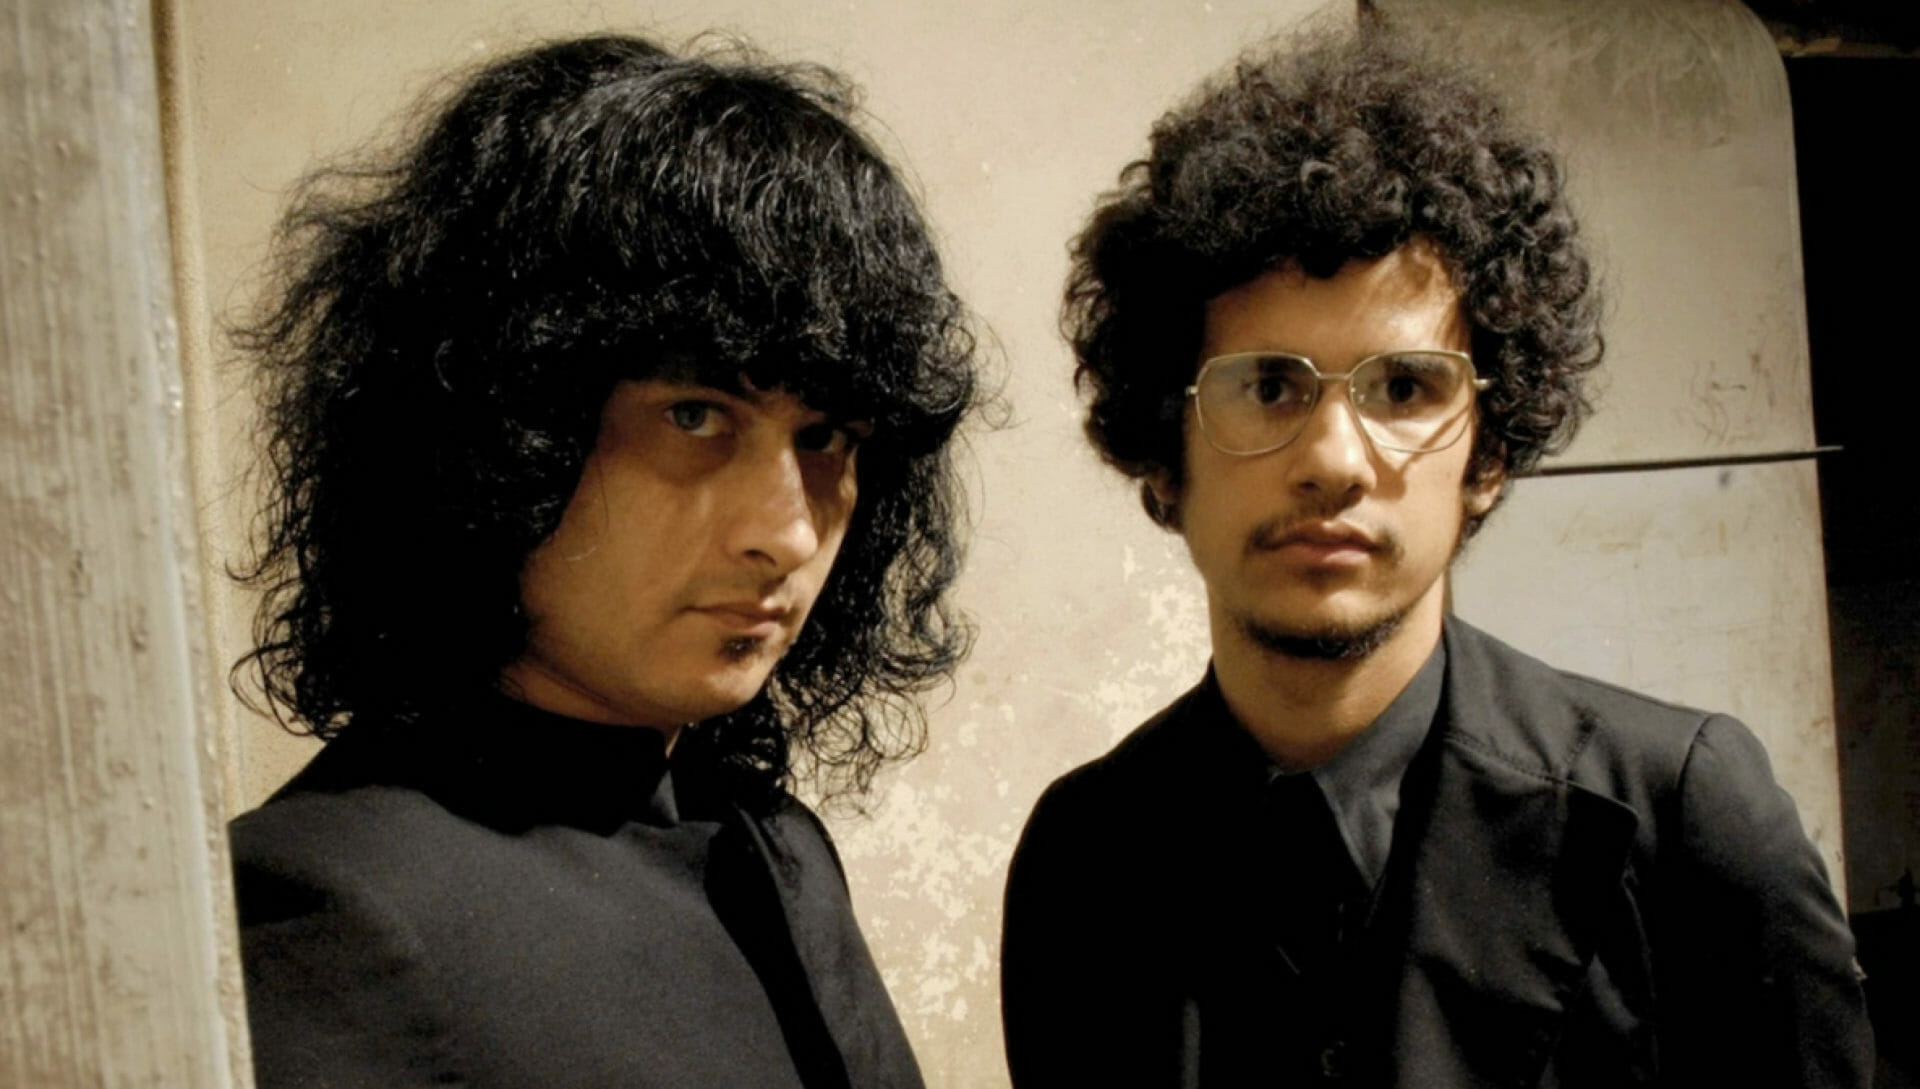 The Mars Volta Return with First Song and Tour in Nearly 10 Years